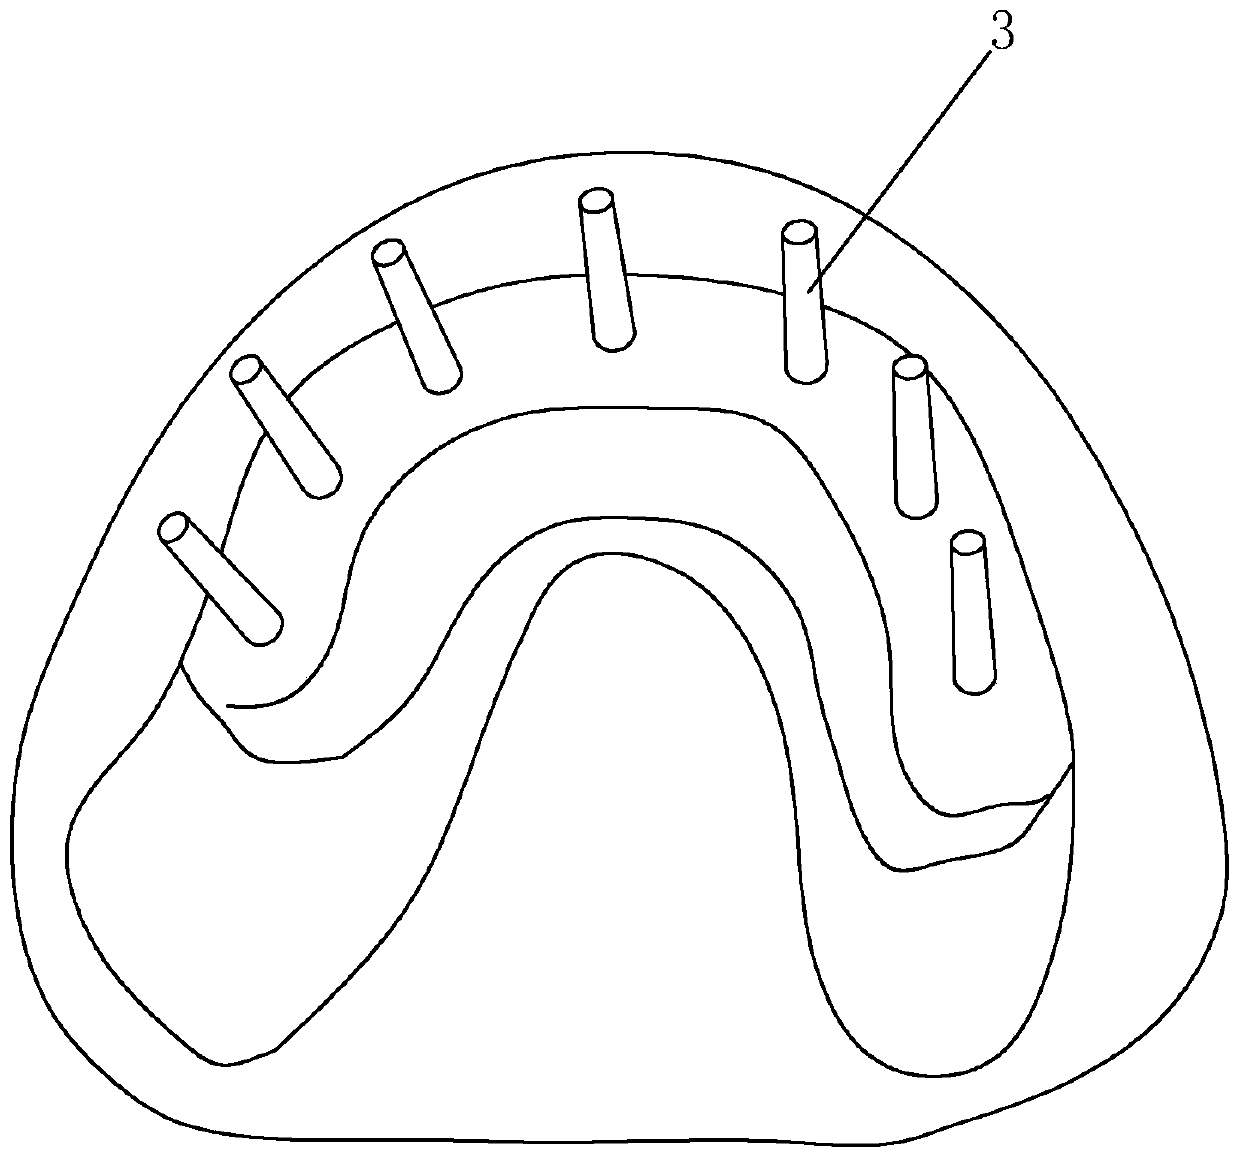 Making method of edentulous jaw precise tooth transfer model